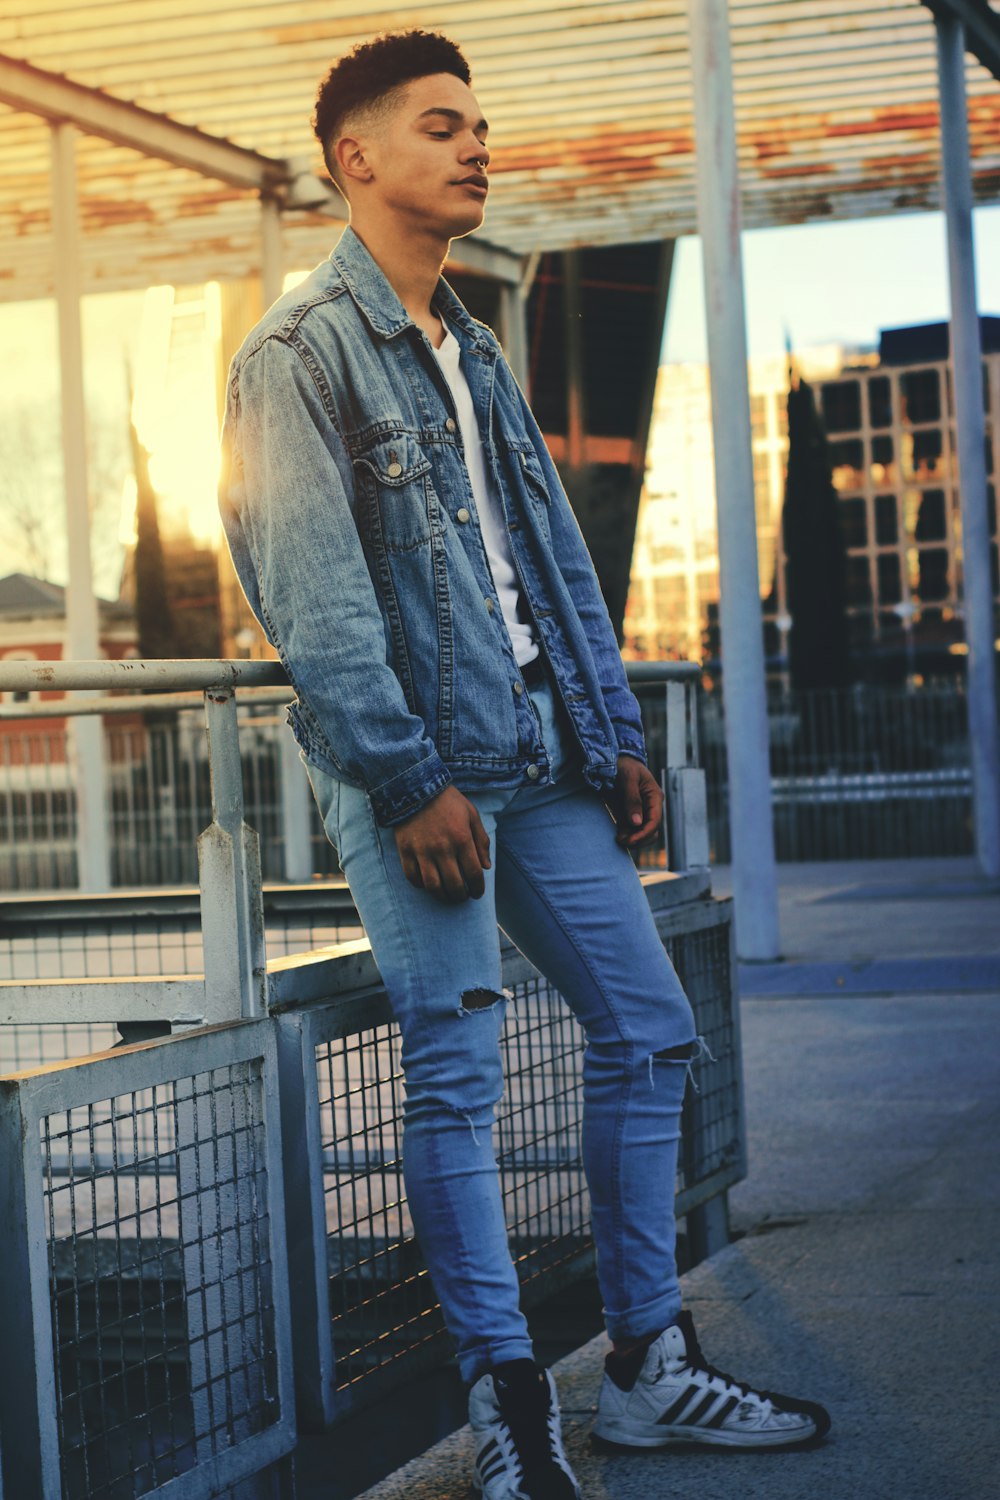 man in blue denim jacket leaning on safety hand rail